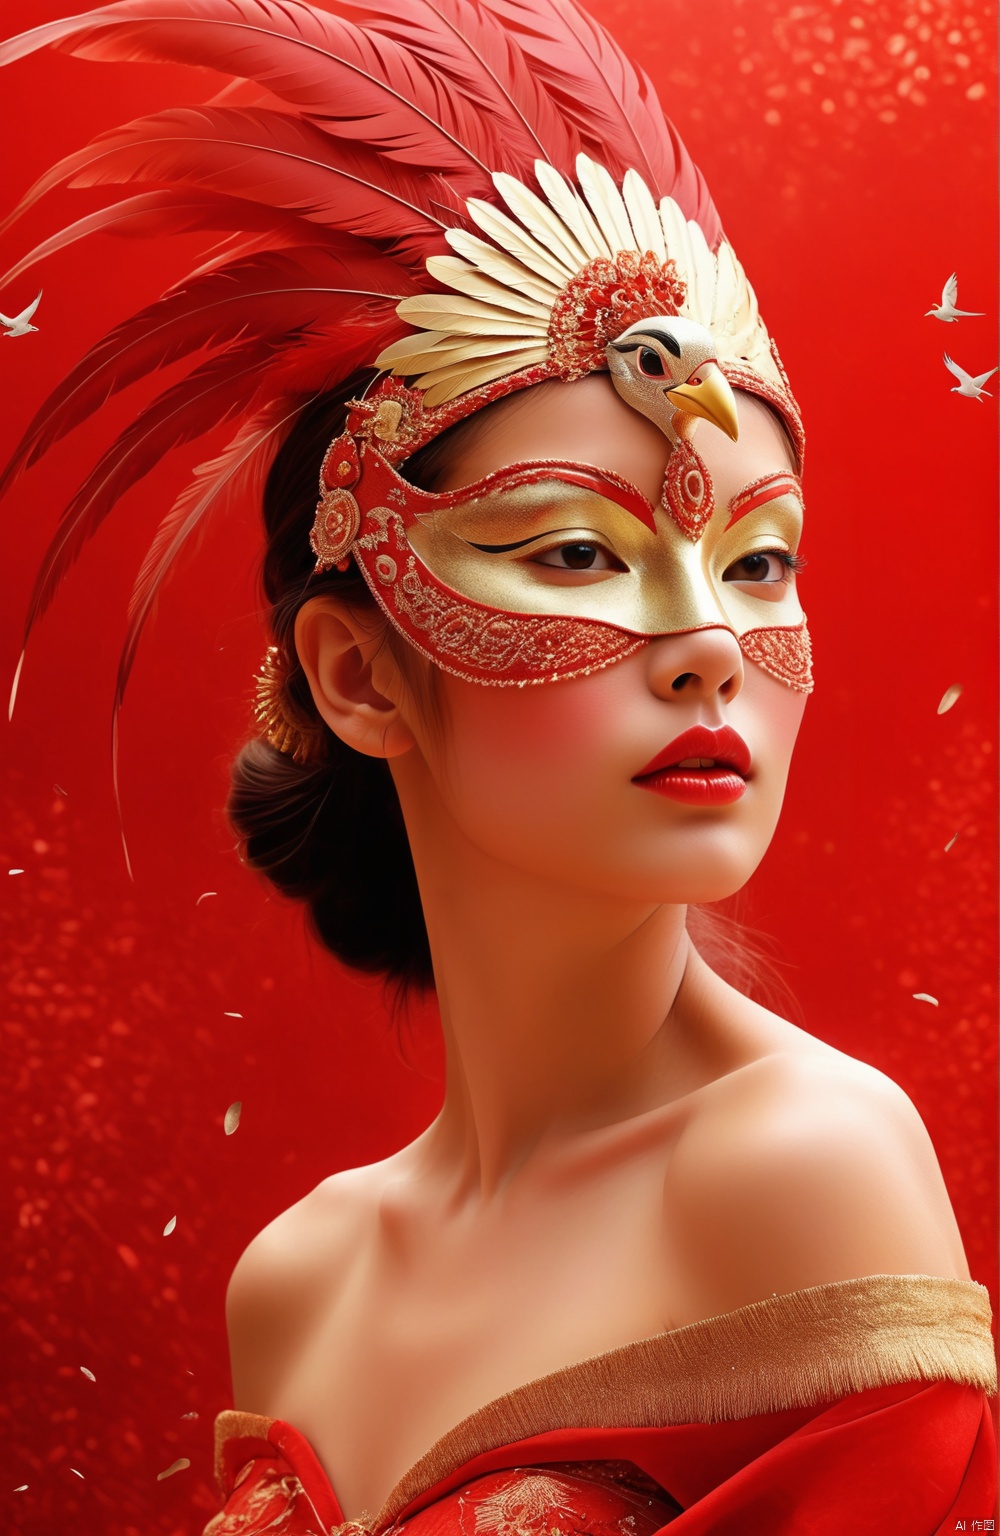  A surreal and fantastical image of a lonely young woman fusing human form with bird features. Her face is adorned with a gold mask, her straight nose and sexy lips reveal the girl's beauty, feathers adorn her headdress, and her bare shoulders reveal a mature body

, hhfhb, Red festive wallpaper